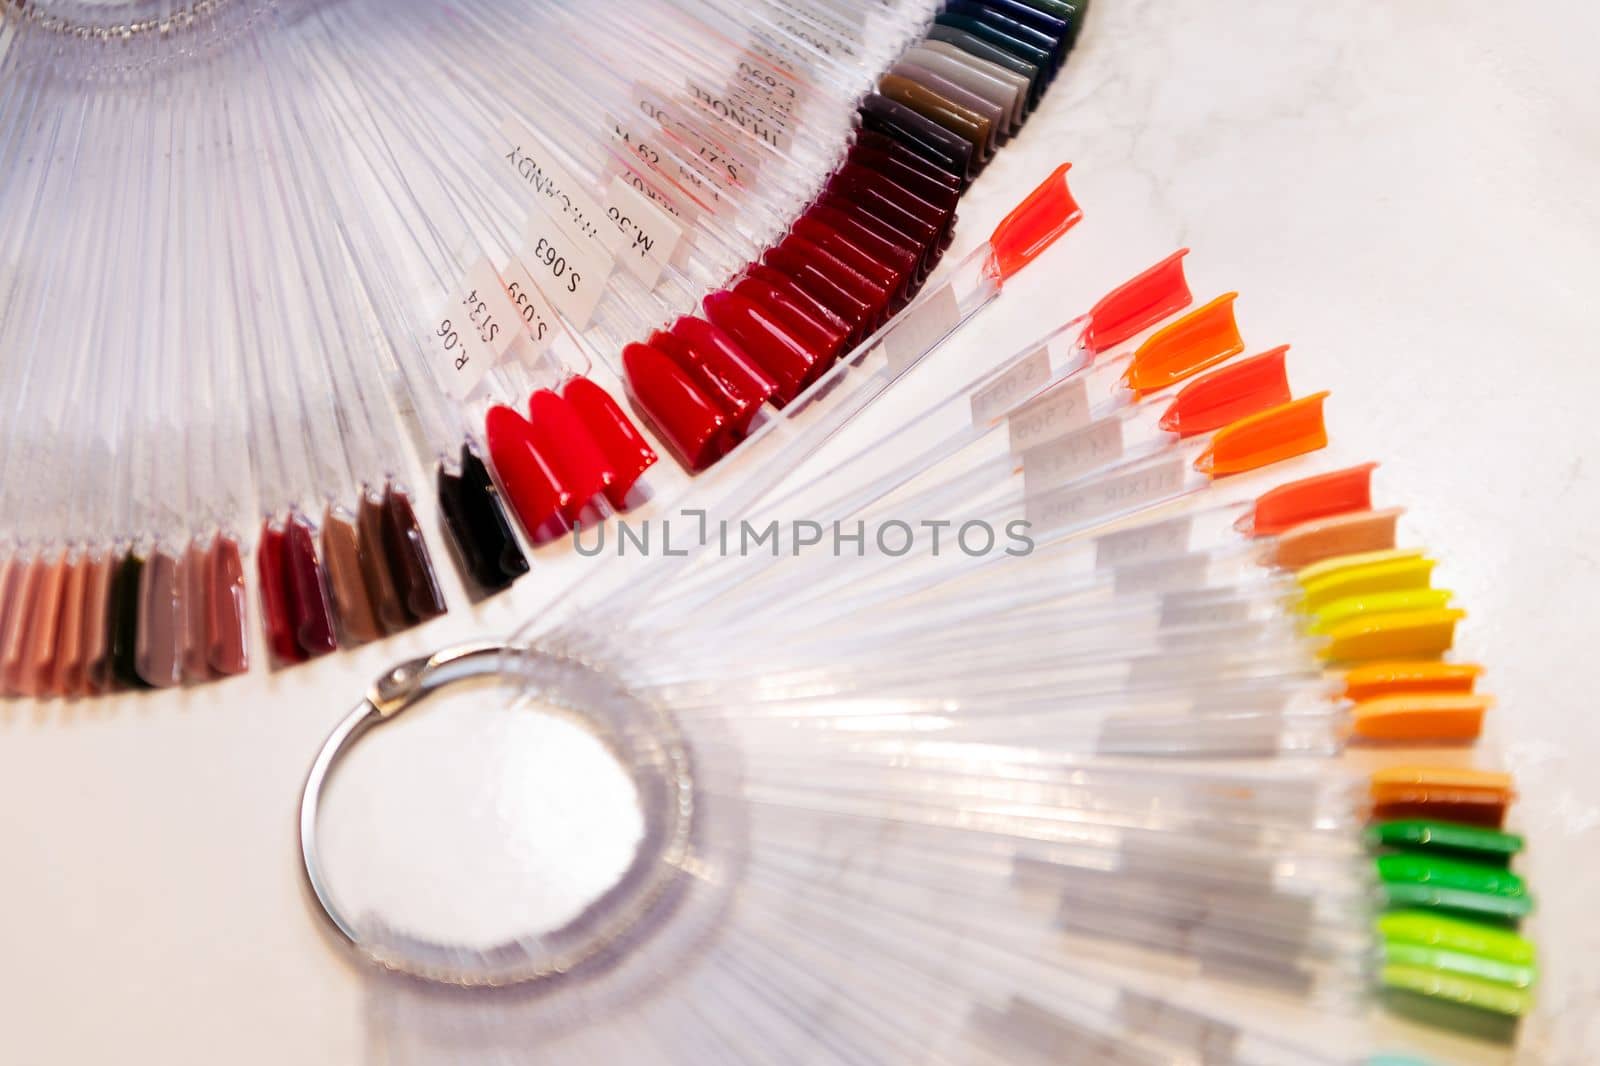 color chart of nail polish colors for painting nails, beauty and manicure concept